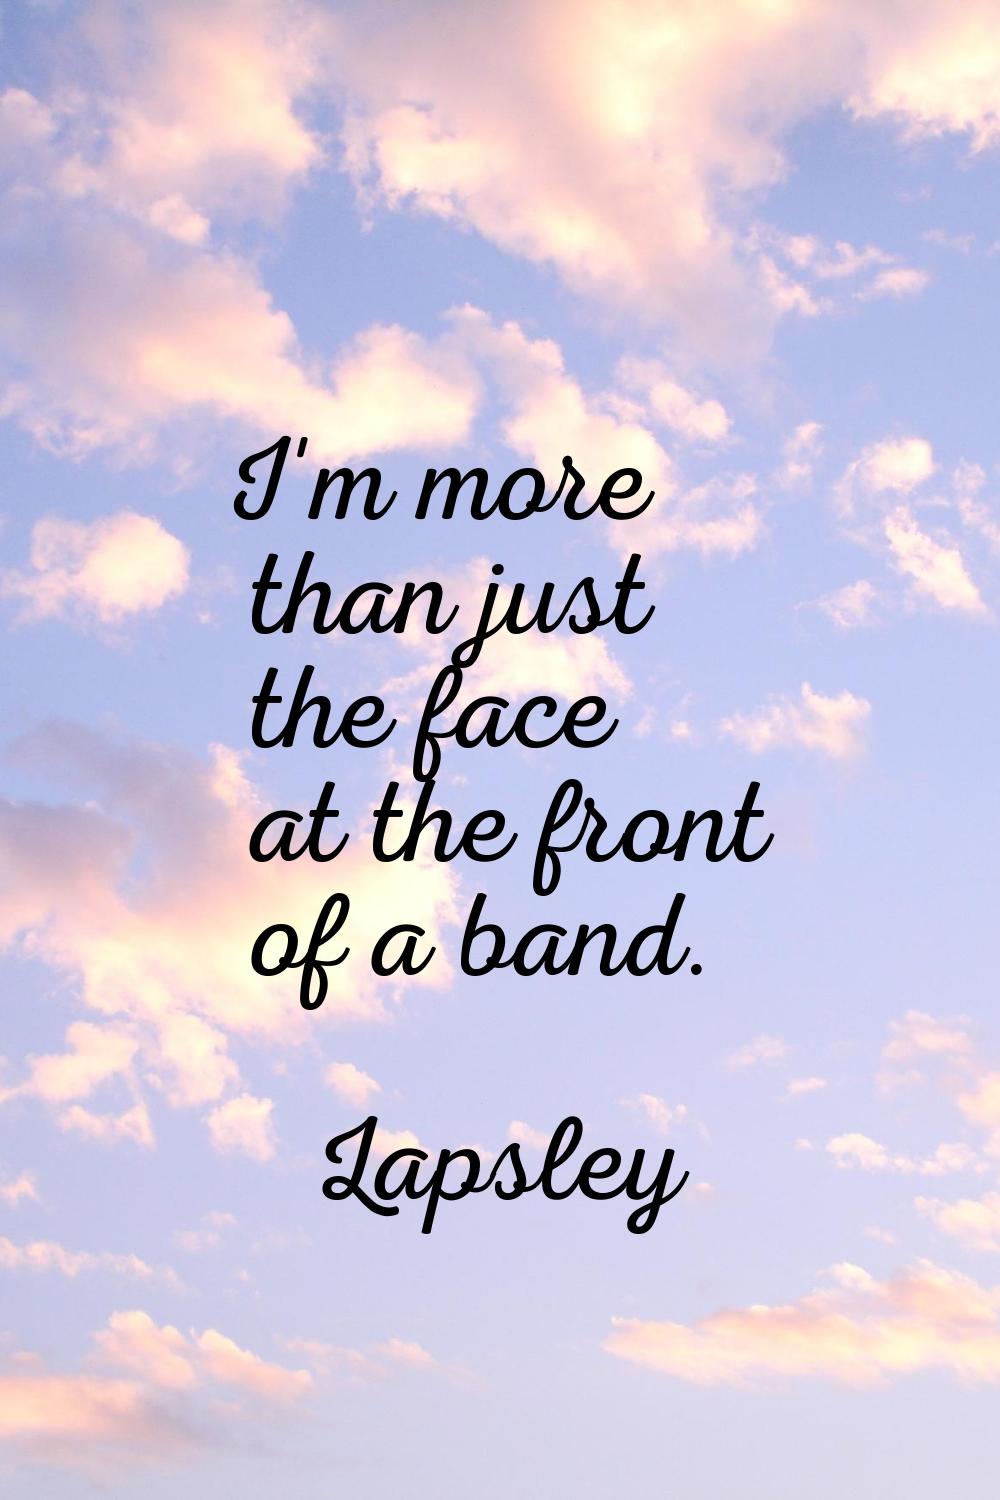 I'm more than just the face at the front of a band.